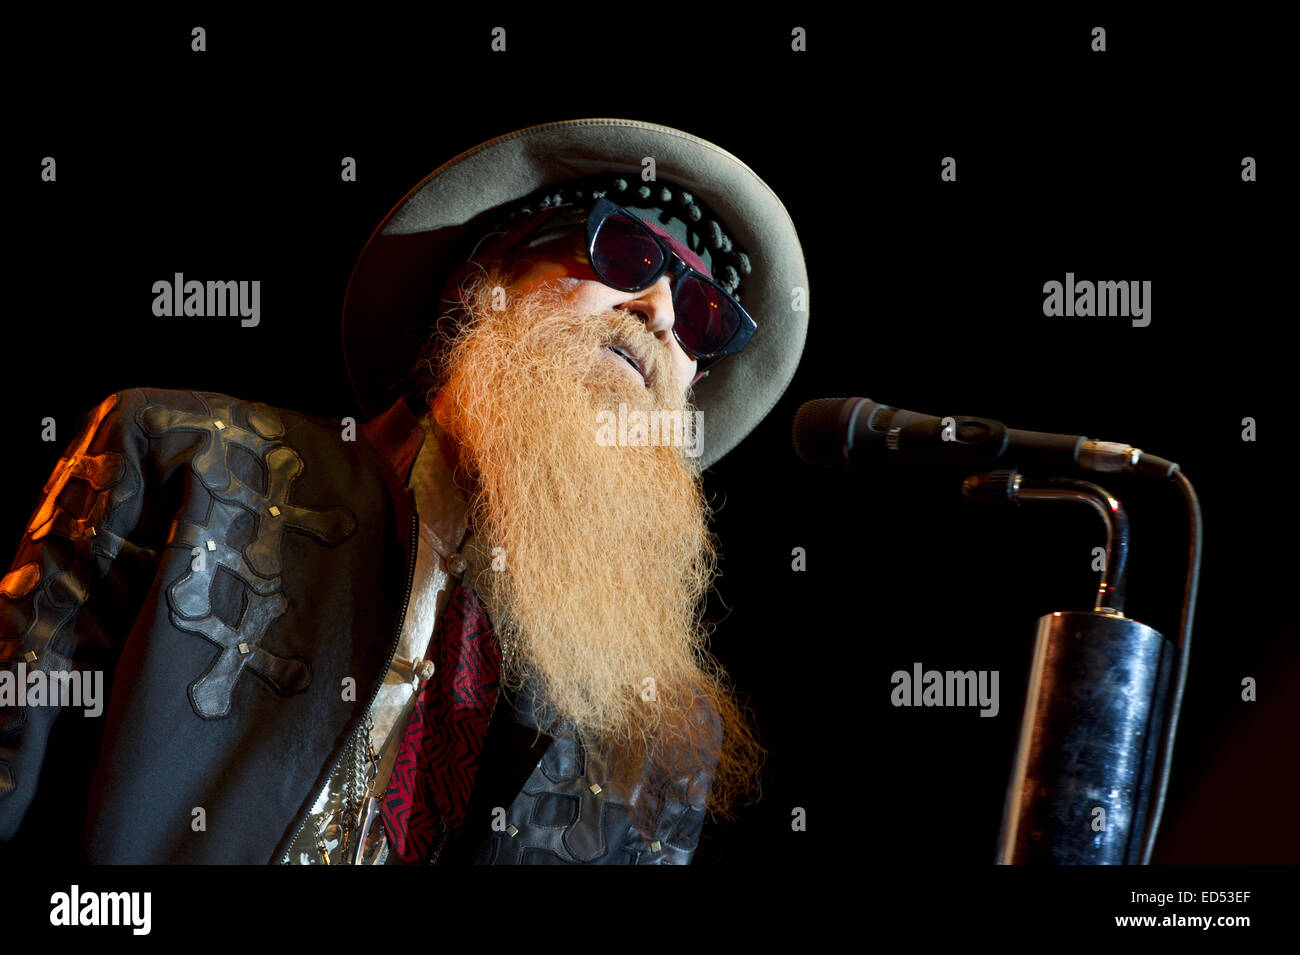 ZZ Top performing live on stage at the Heineken Music Hall  Where: Amsterdam, Netherlands When: 24 Jun 2014 Stock Photo